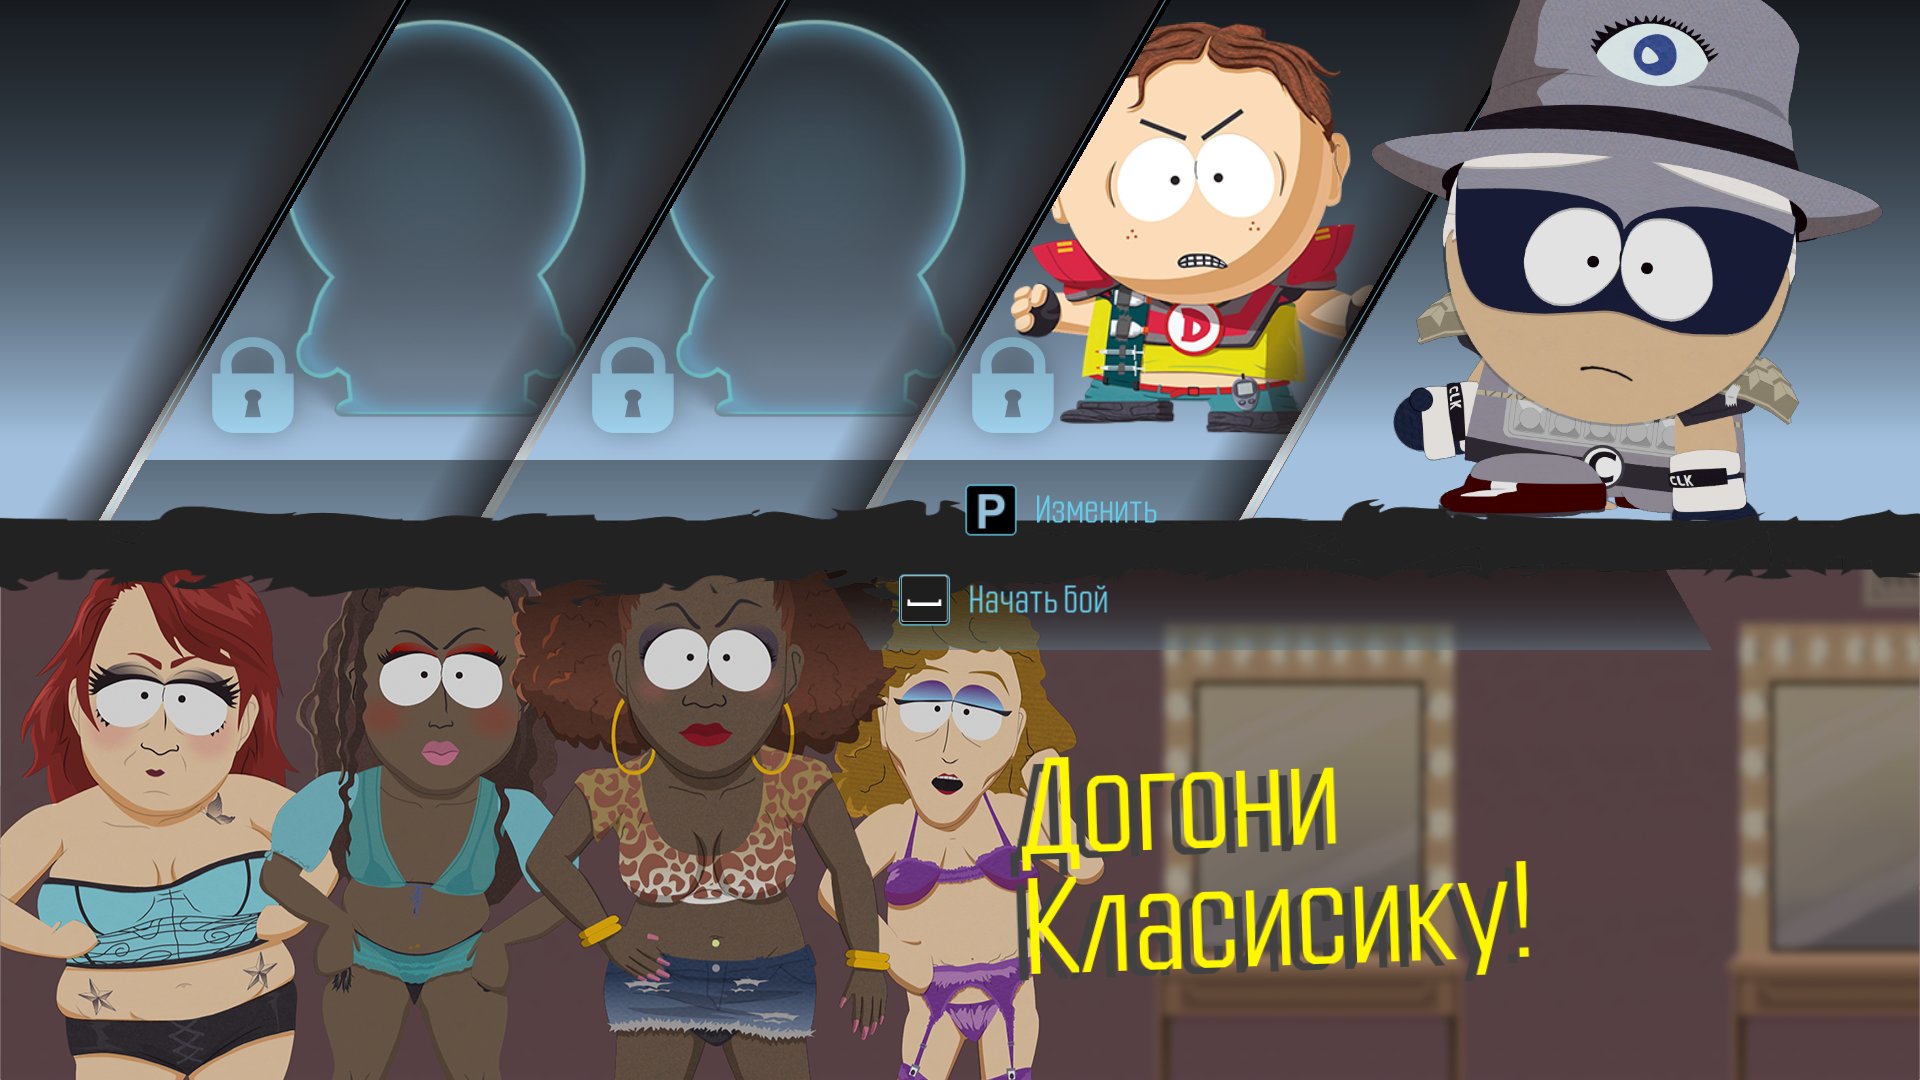 South park the fractured but whole купить ключ steam дешево фото 37